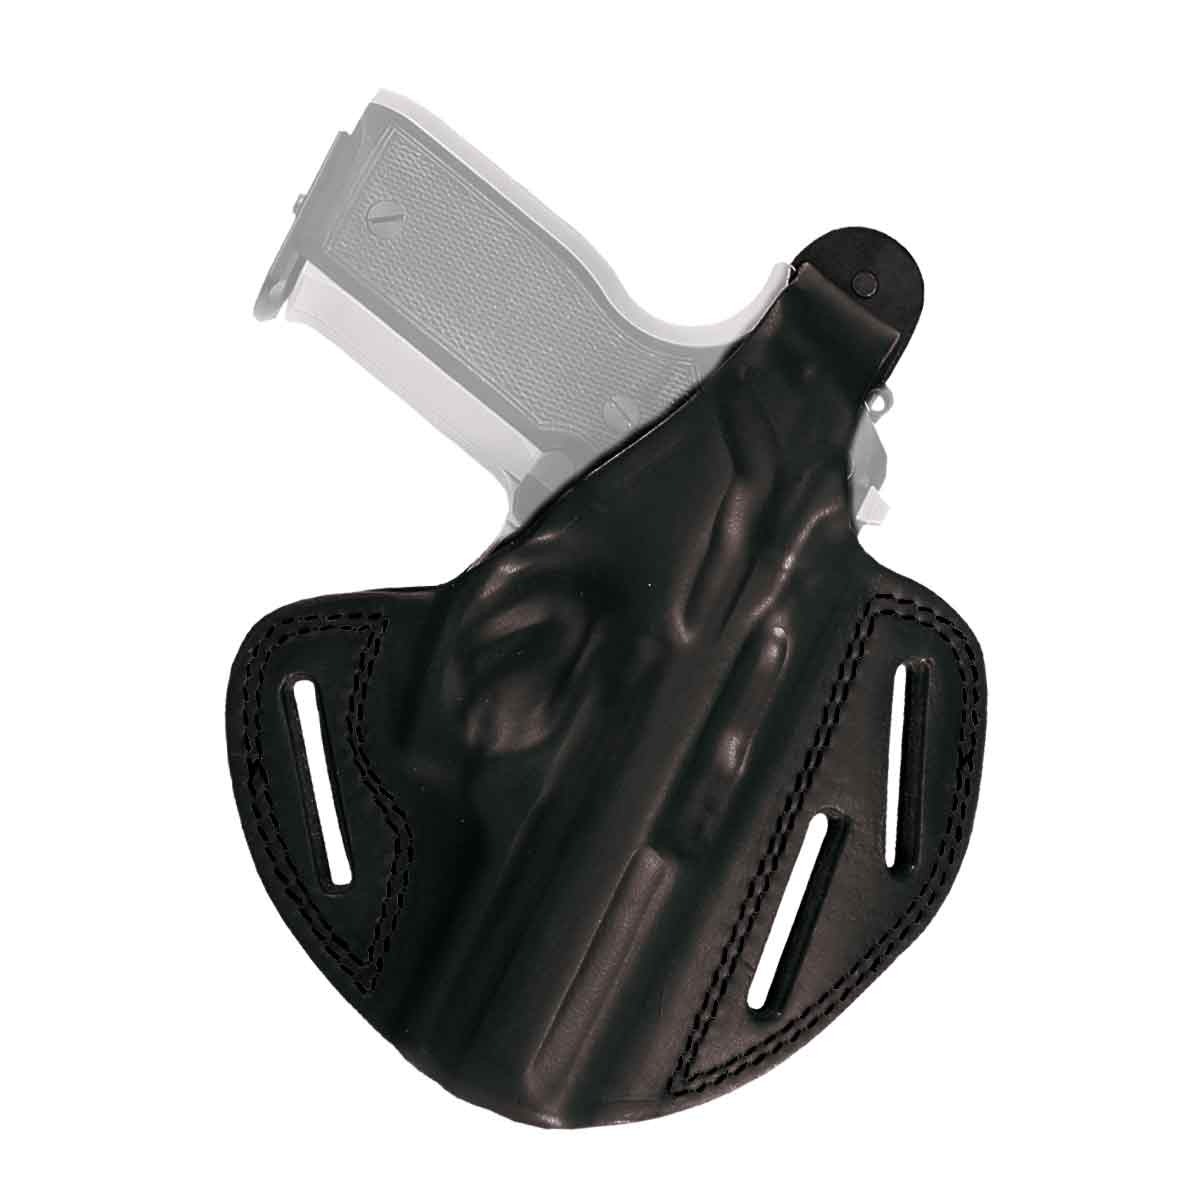 Pancake holster with two carrying positions Glock 20/21,...